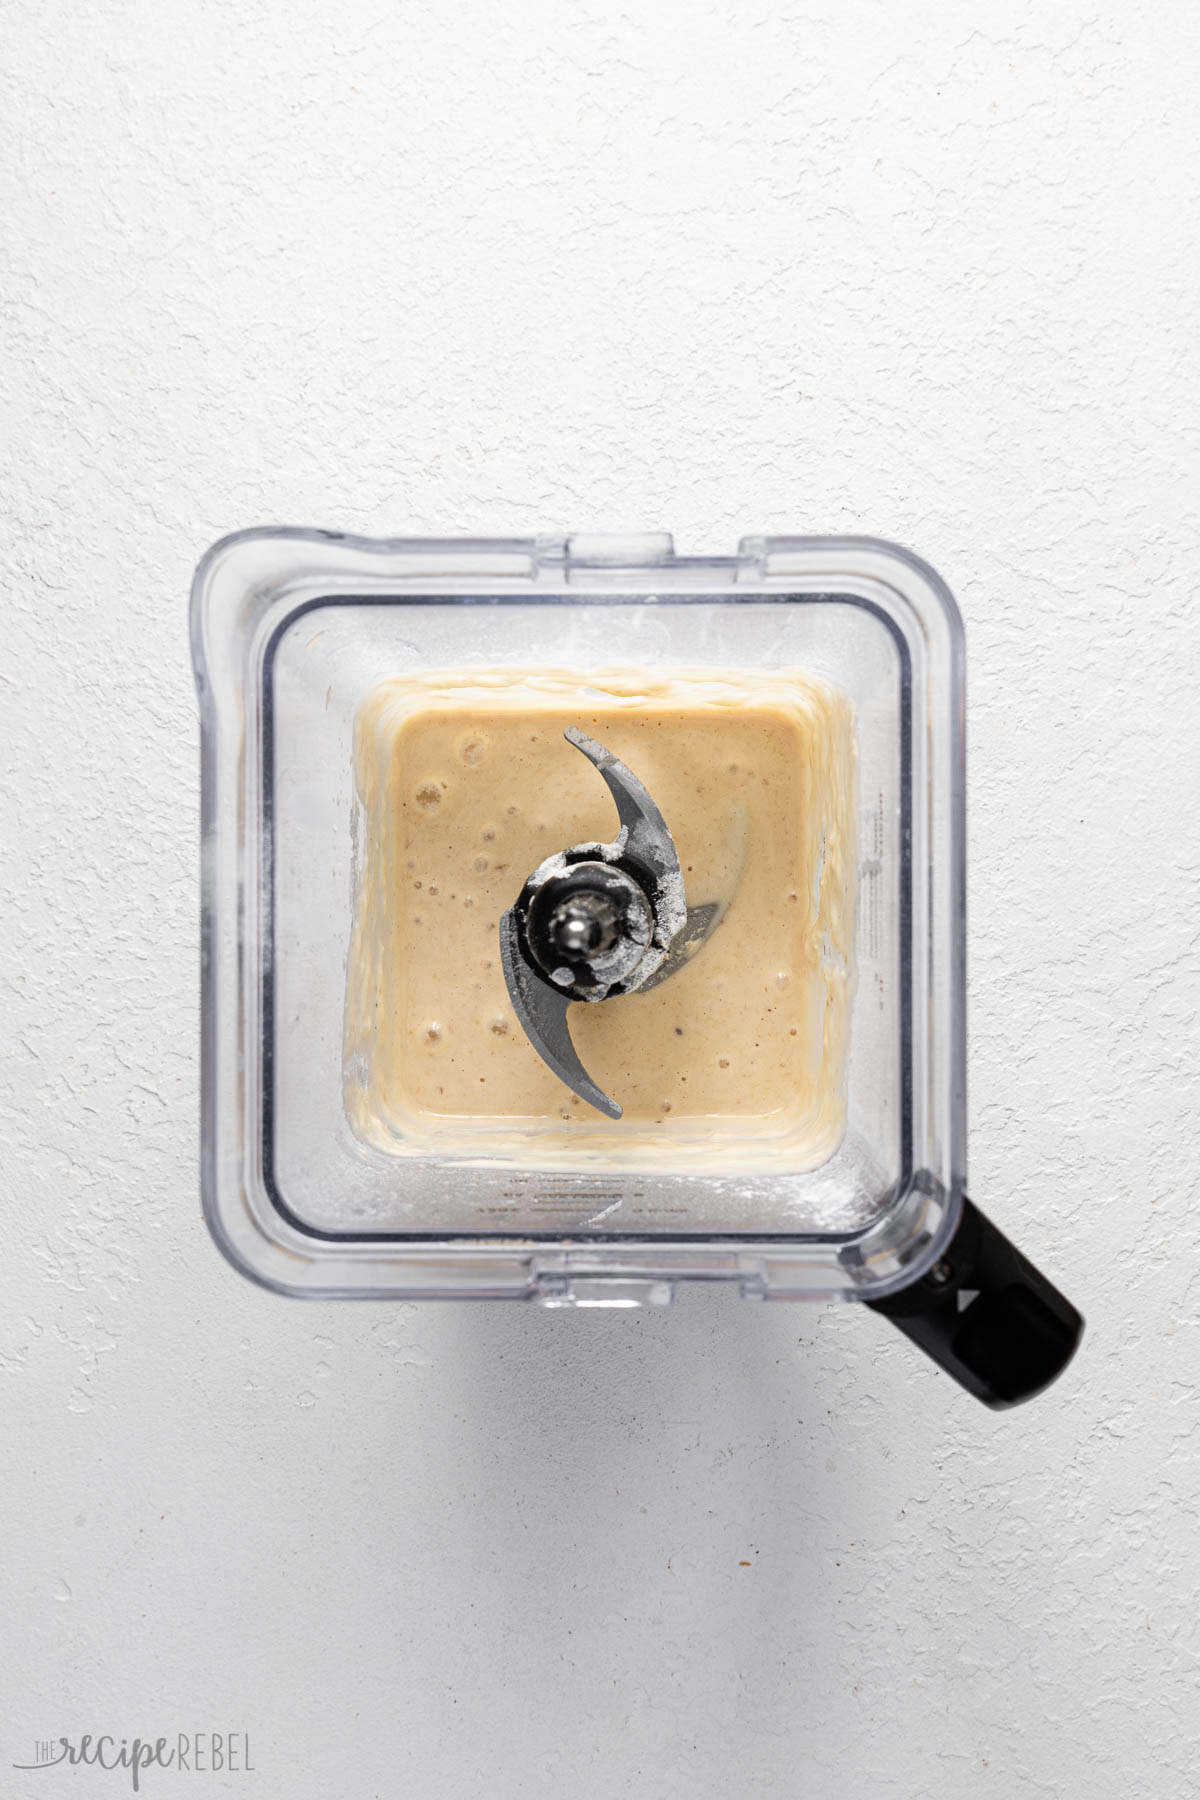 a blender filled with mixed ingredients on a white surface.